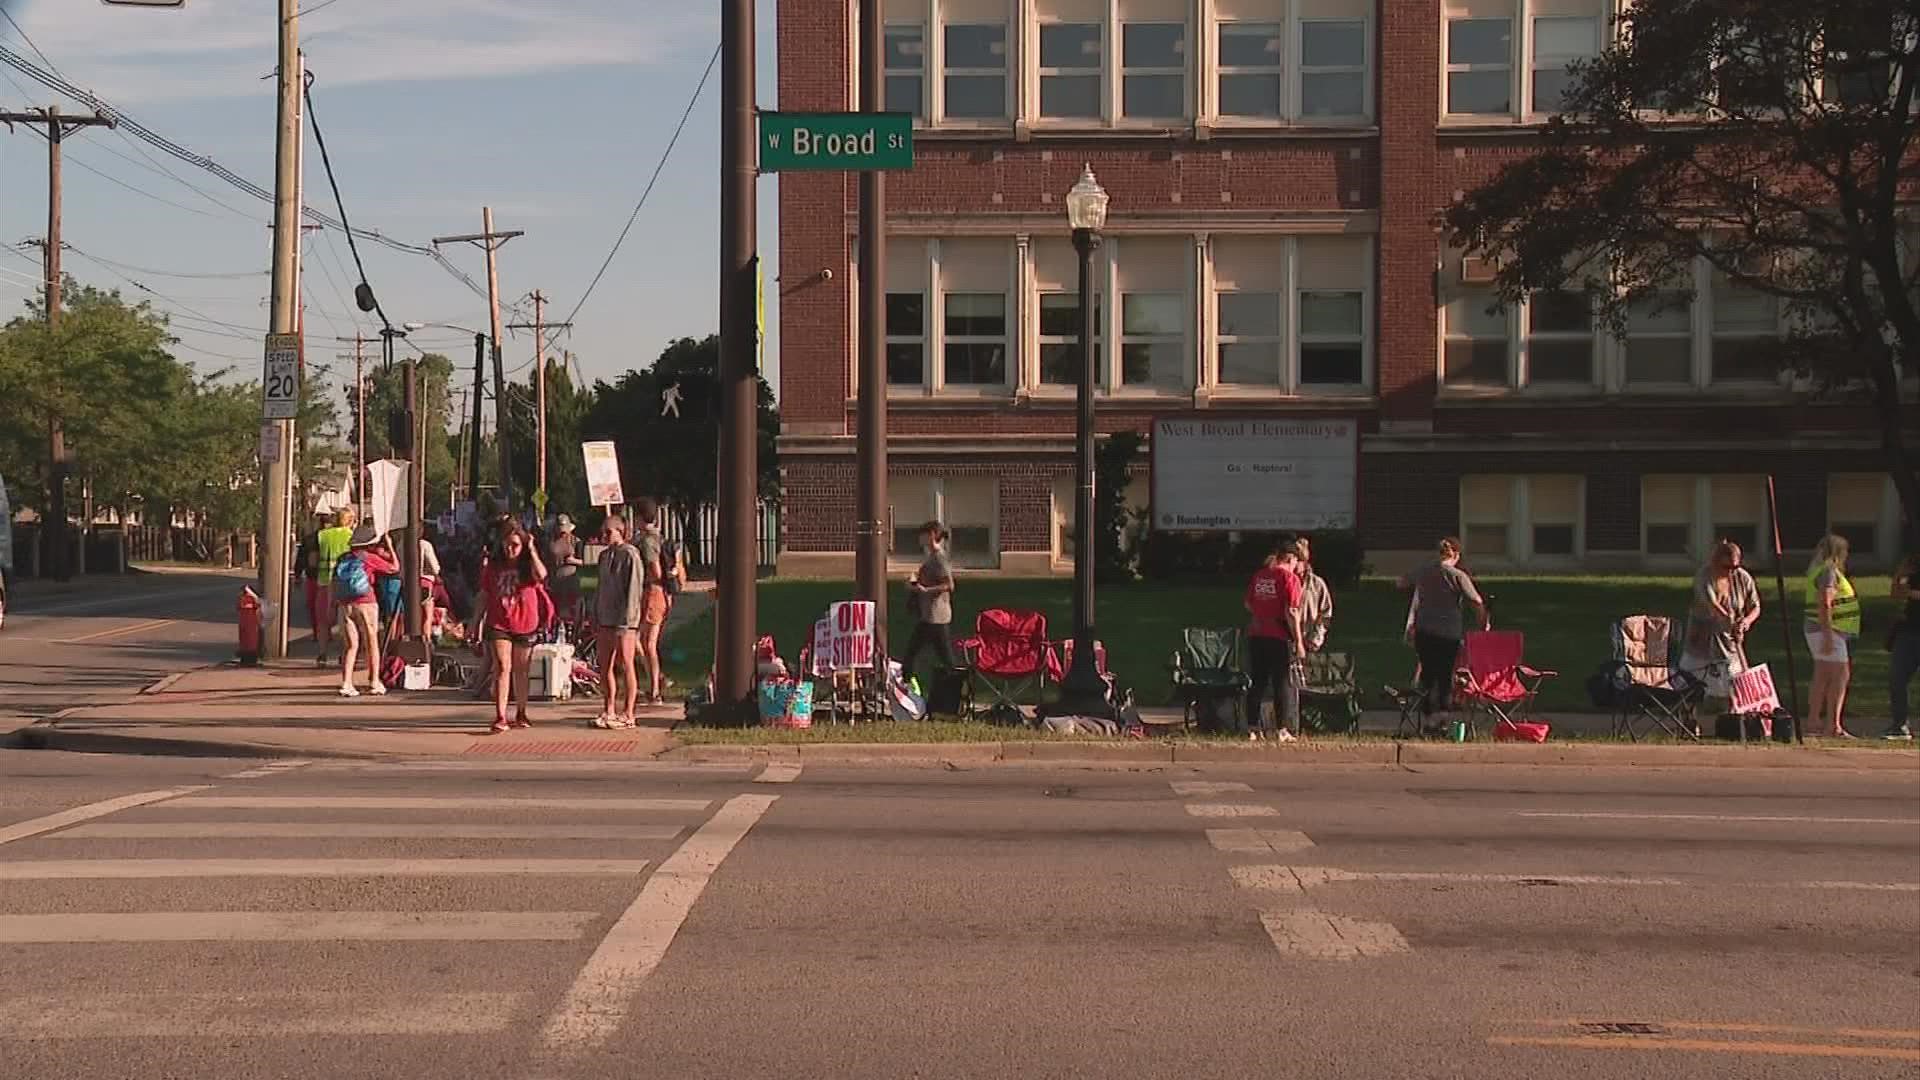 Students at Columbus City Schools are slated to begin remote learning Wednesday as the Columbus teachers’ union enters its second day of striking.